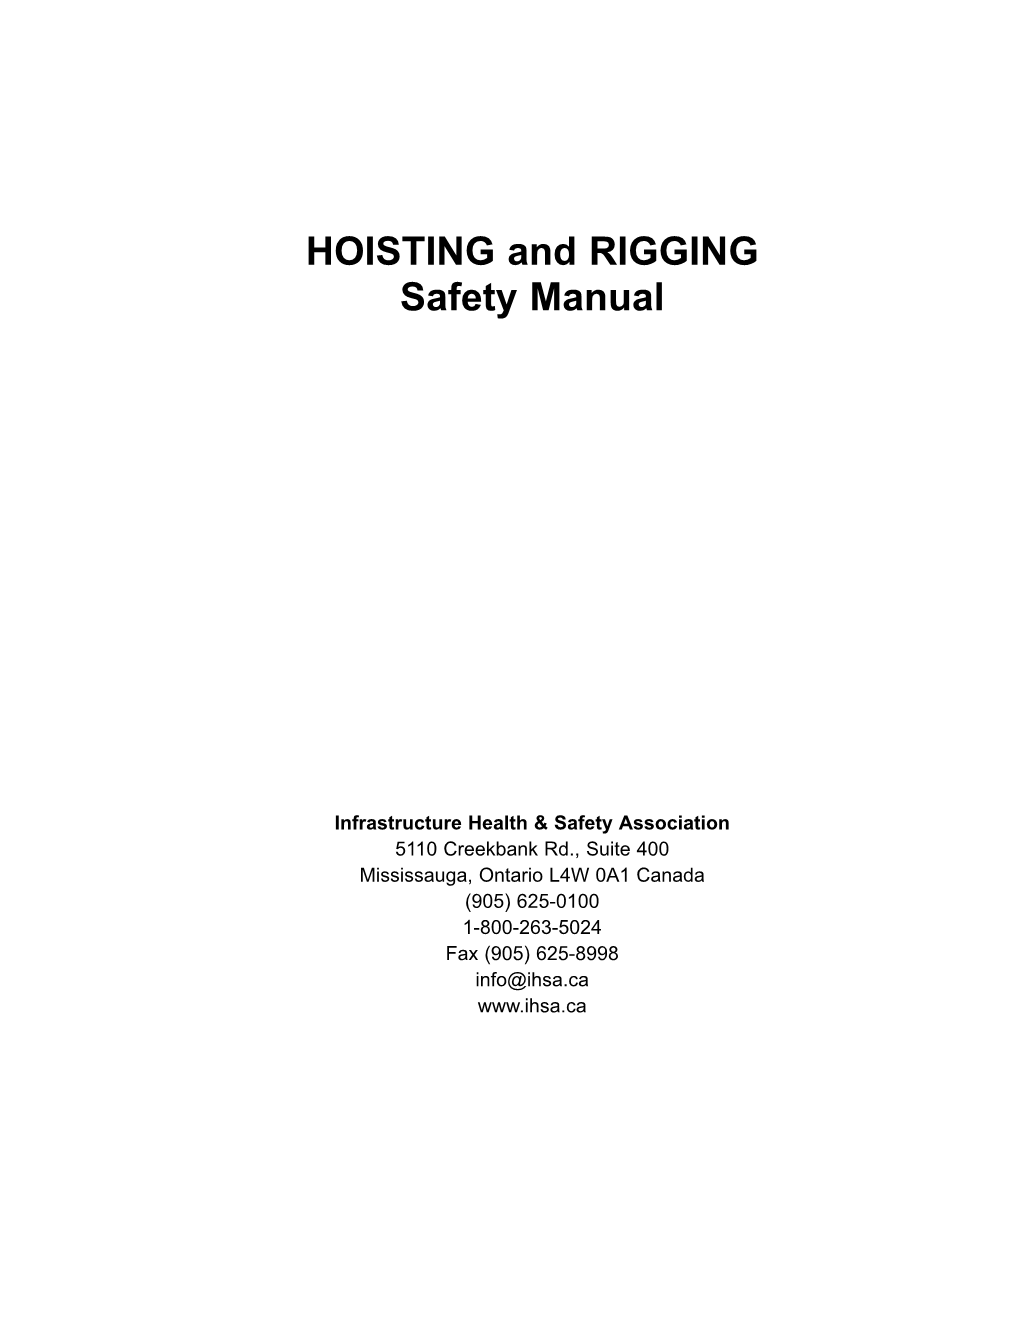 HOISTING and RIGGING Safety Manual